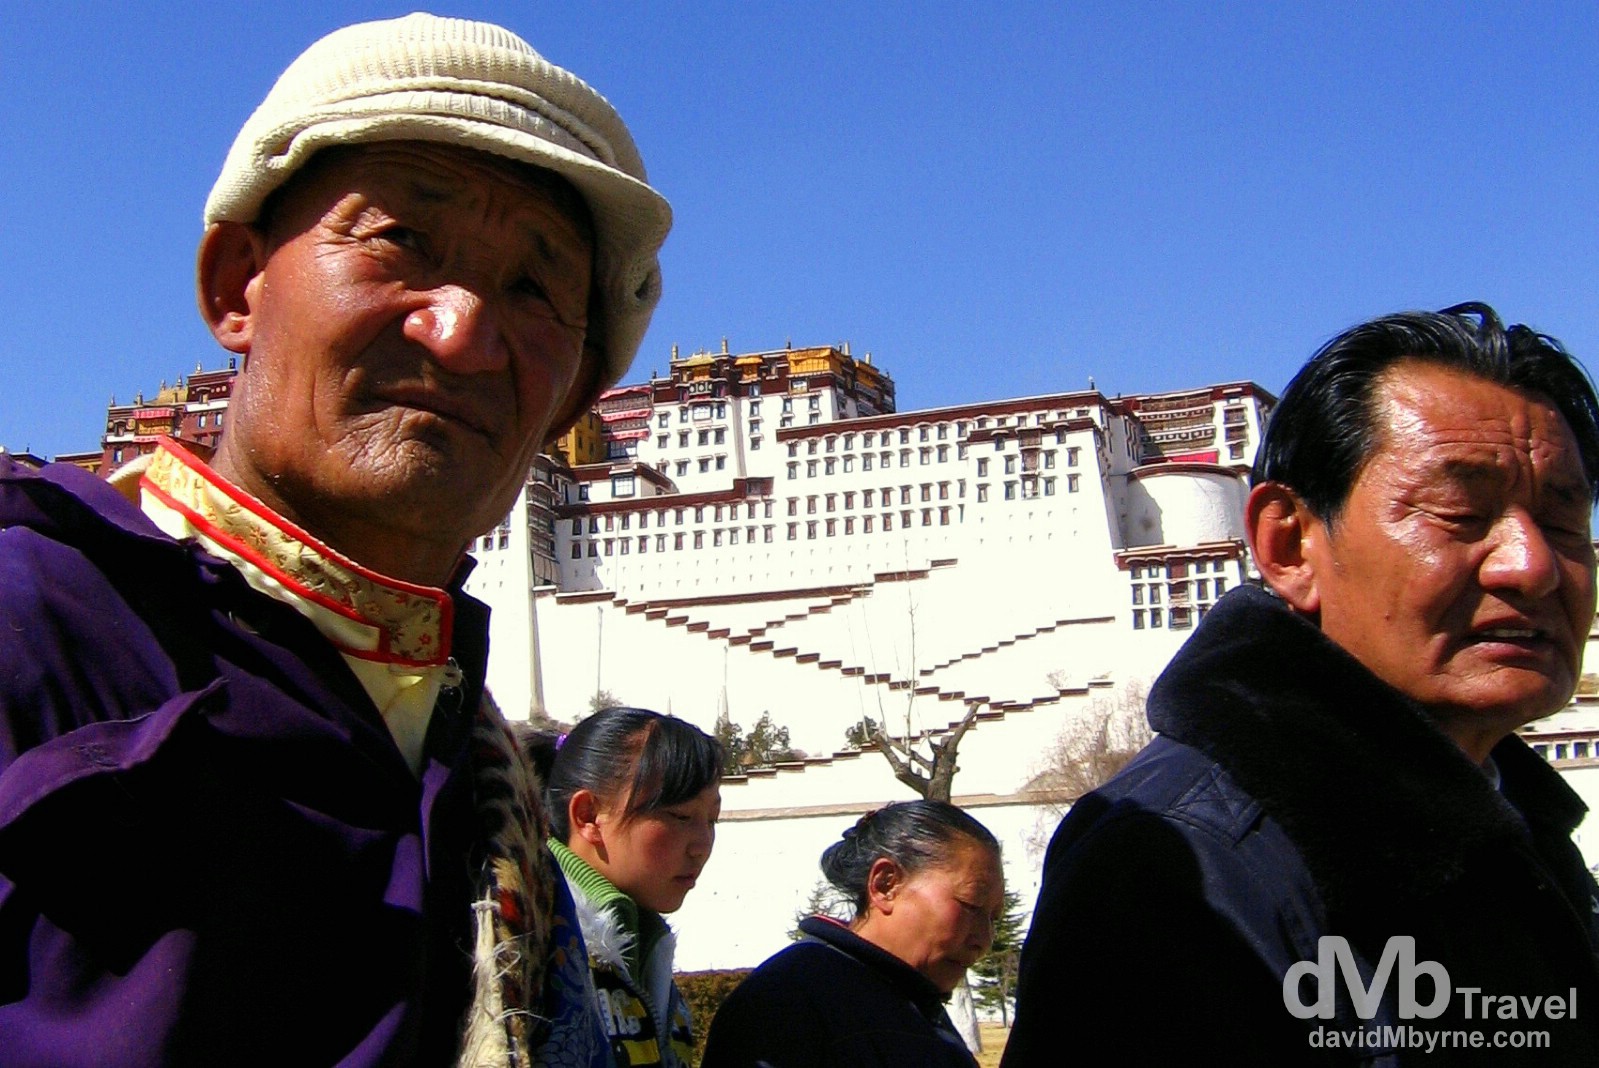 Fronting the Potala Palace in Lhasa, Tibet. February 25th, 2008.